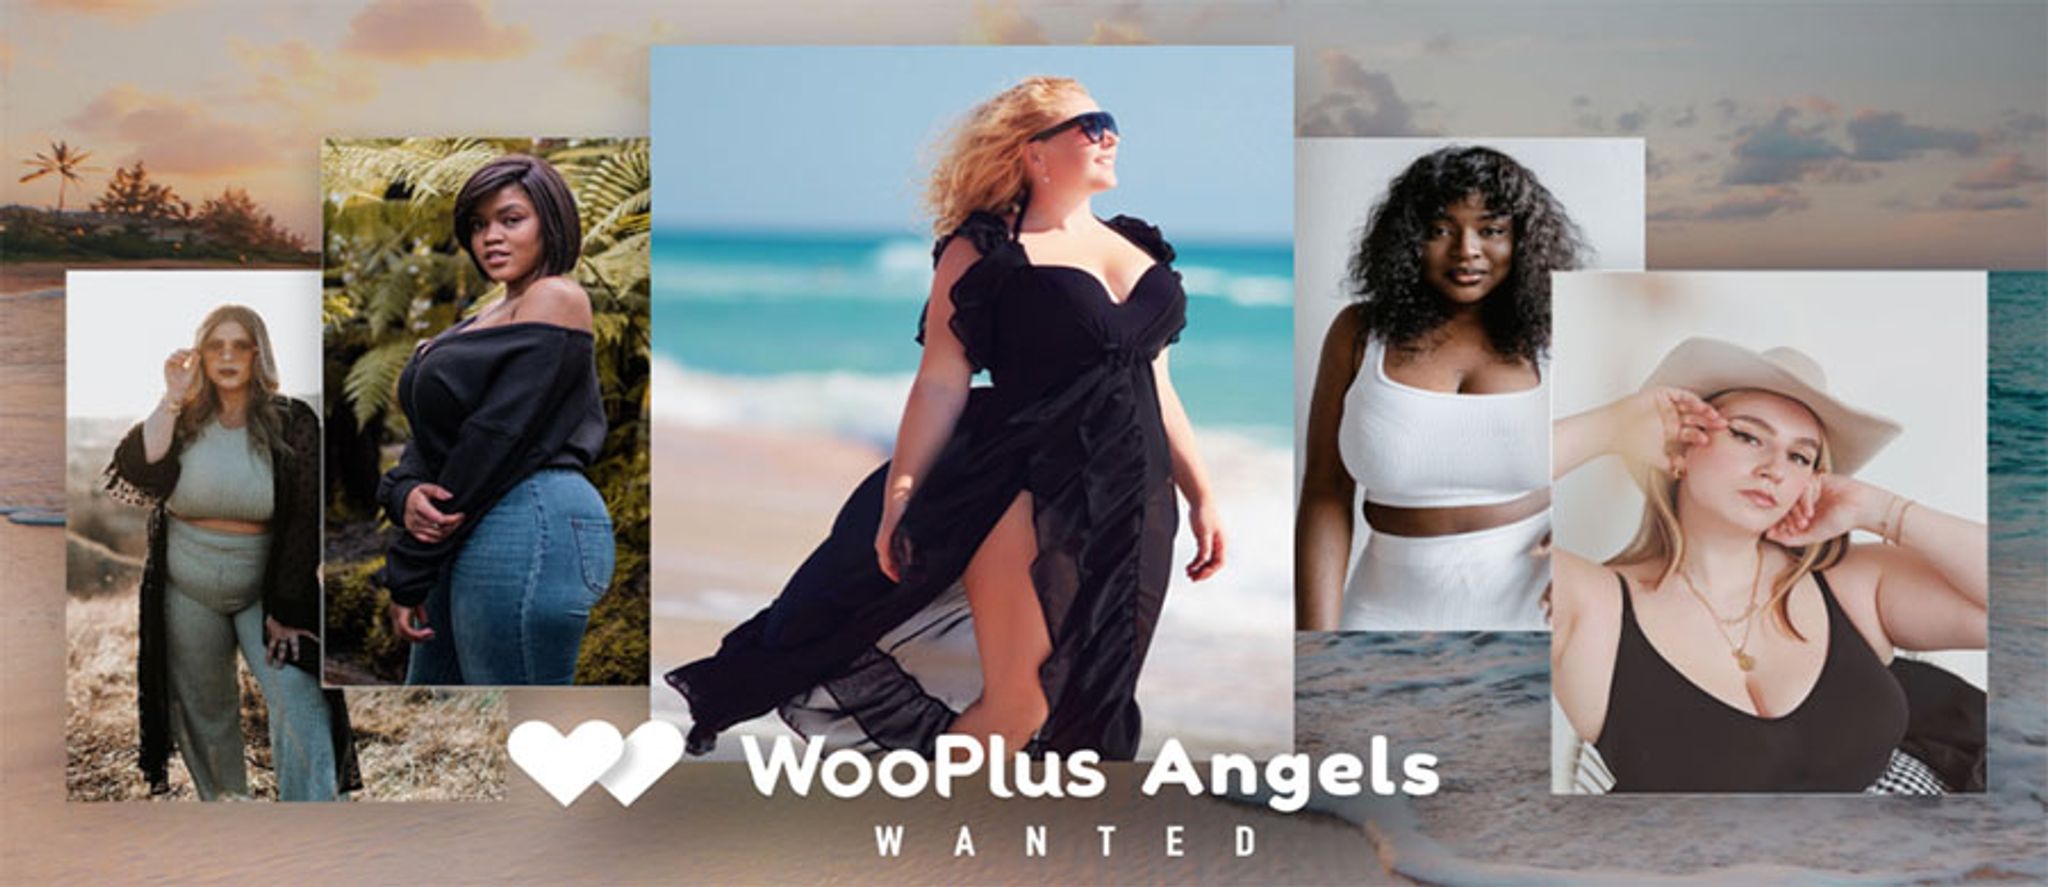 Plus-Size Dating App WooPlus Lashes Out at Fashion Industry by